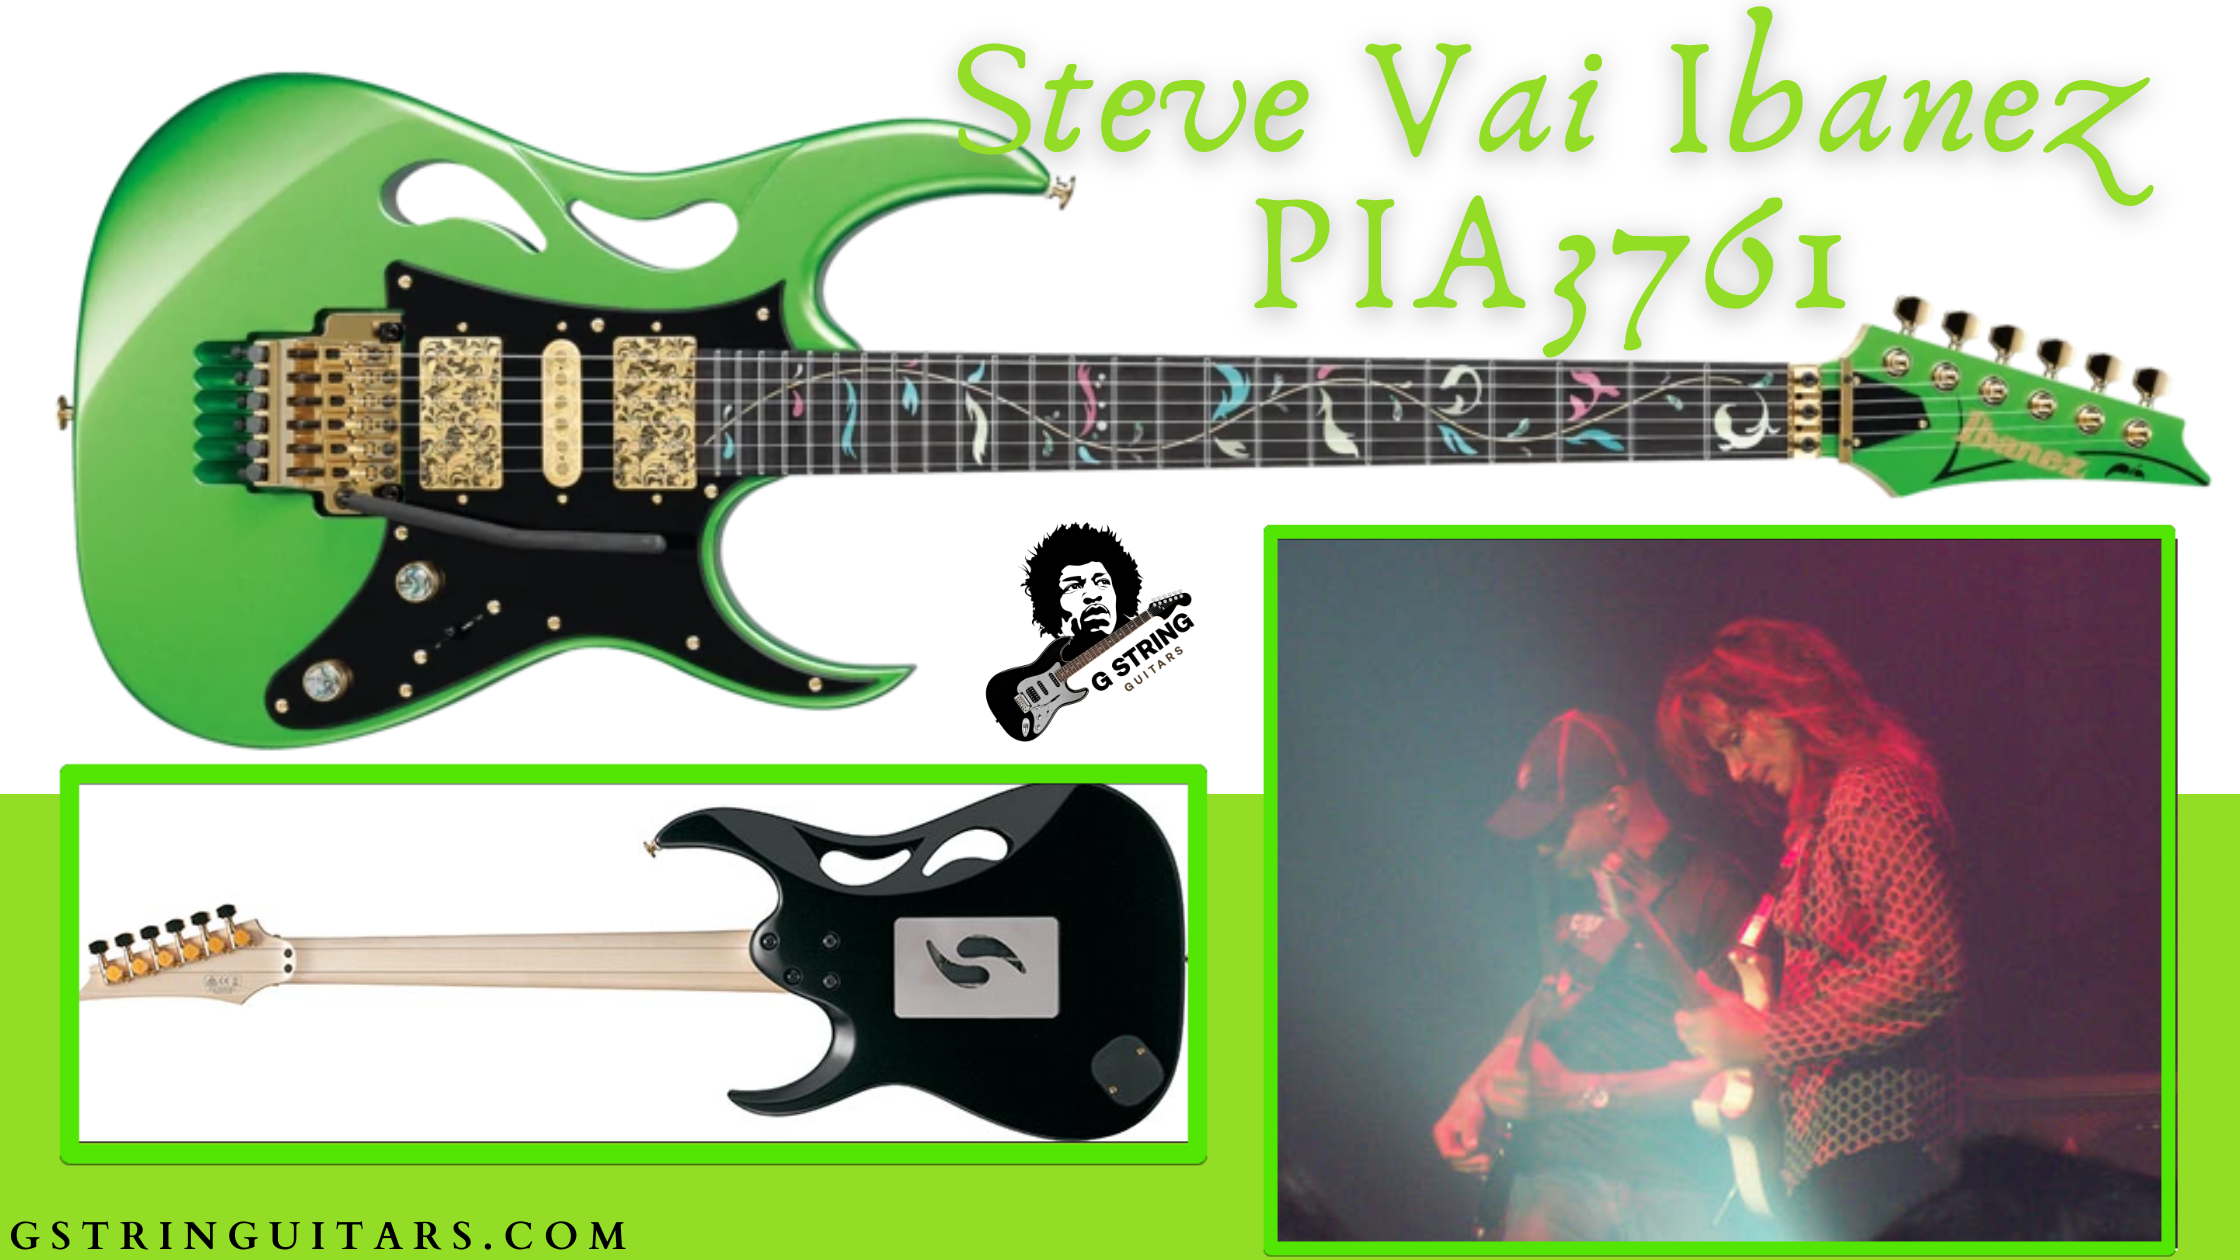 Army fup tvivl Steve Vai and the Ibanez PIA3761 Review | G String Guitars